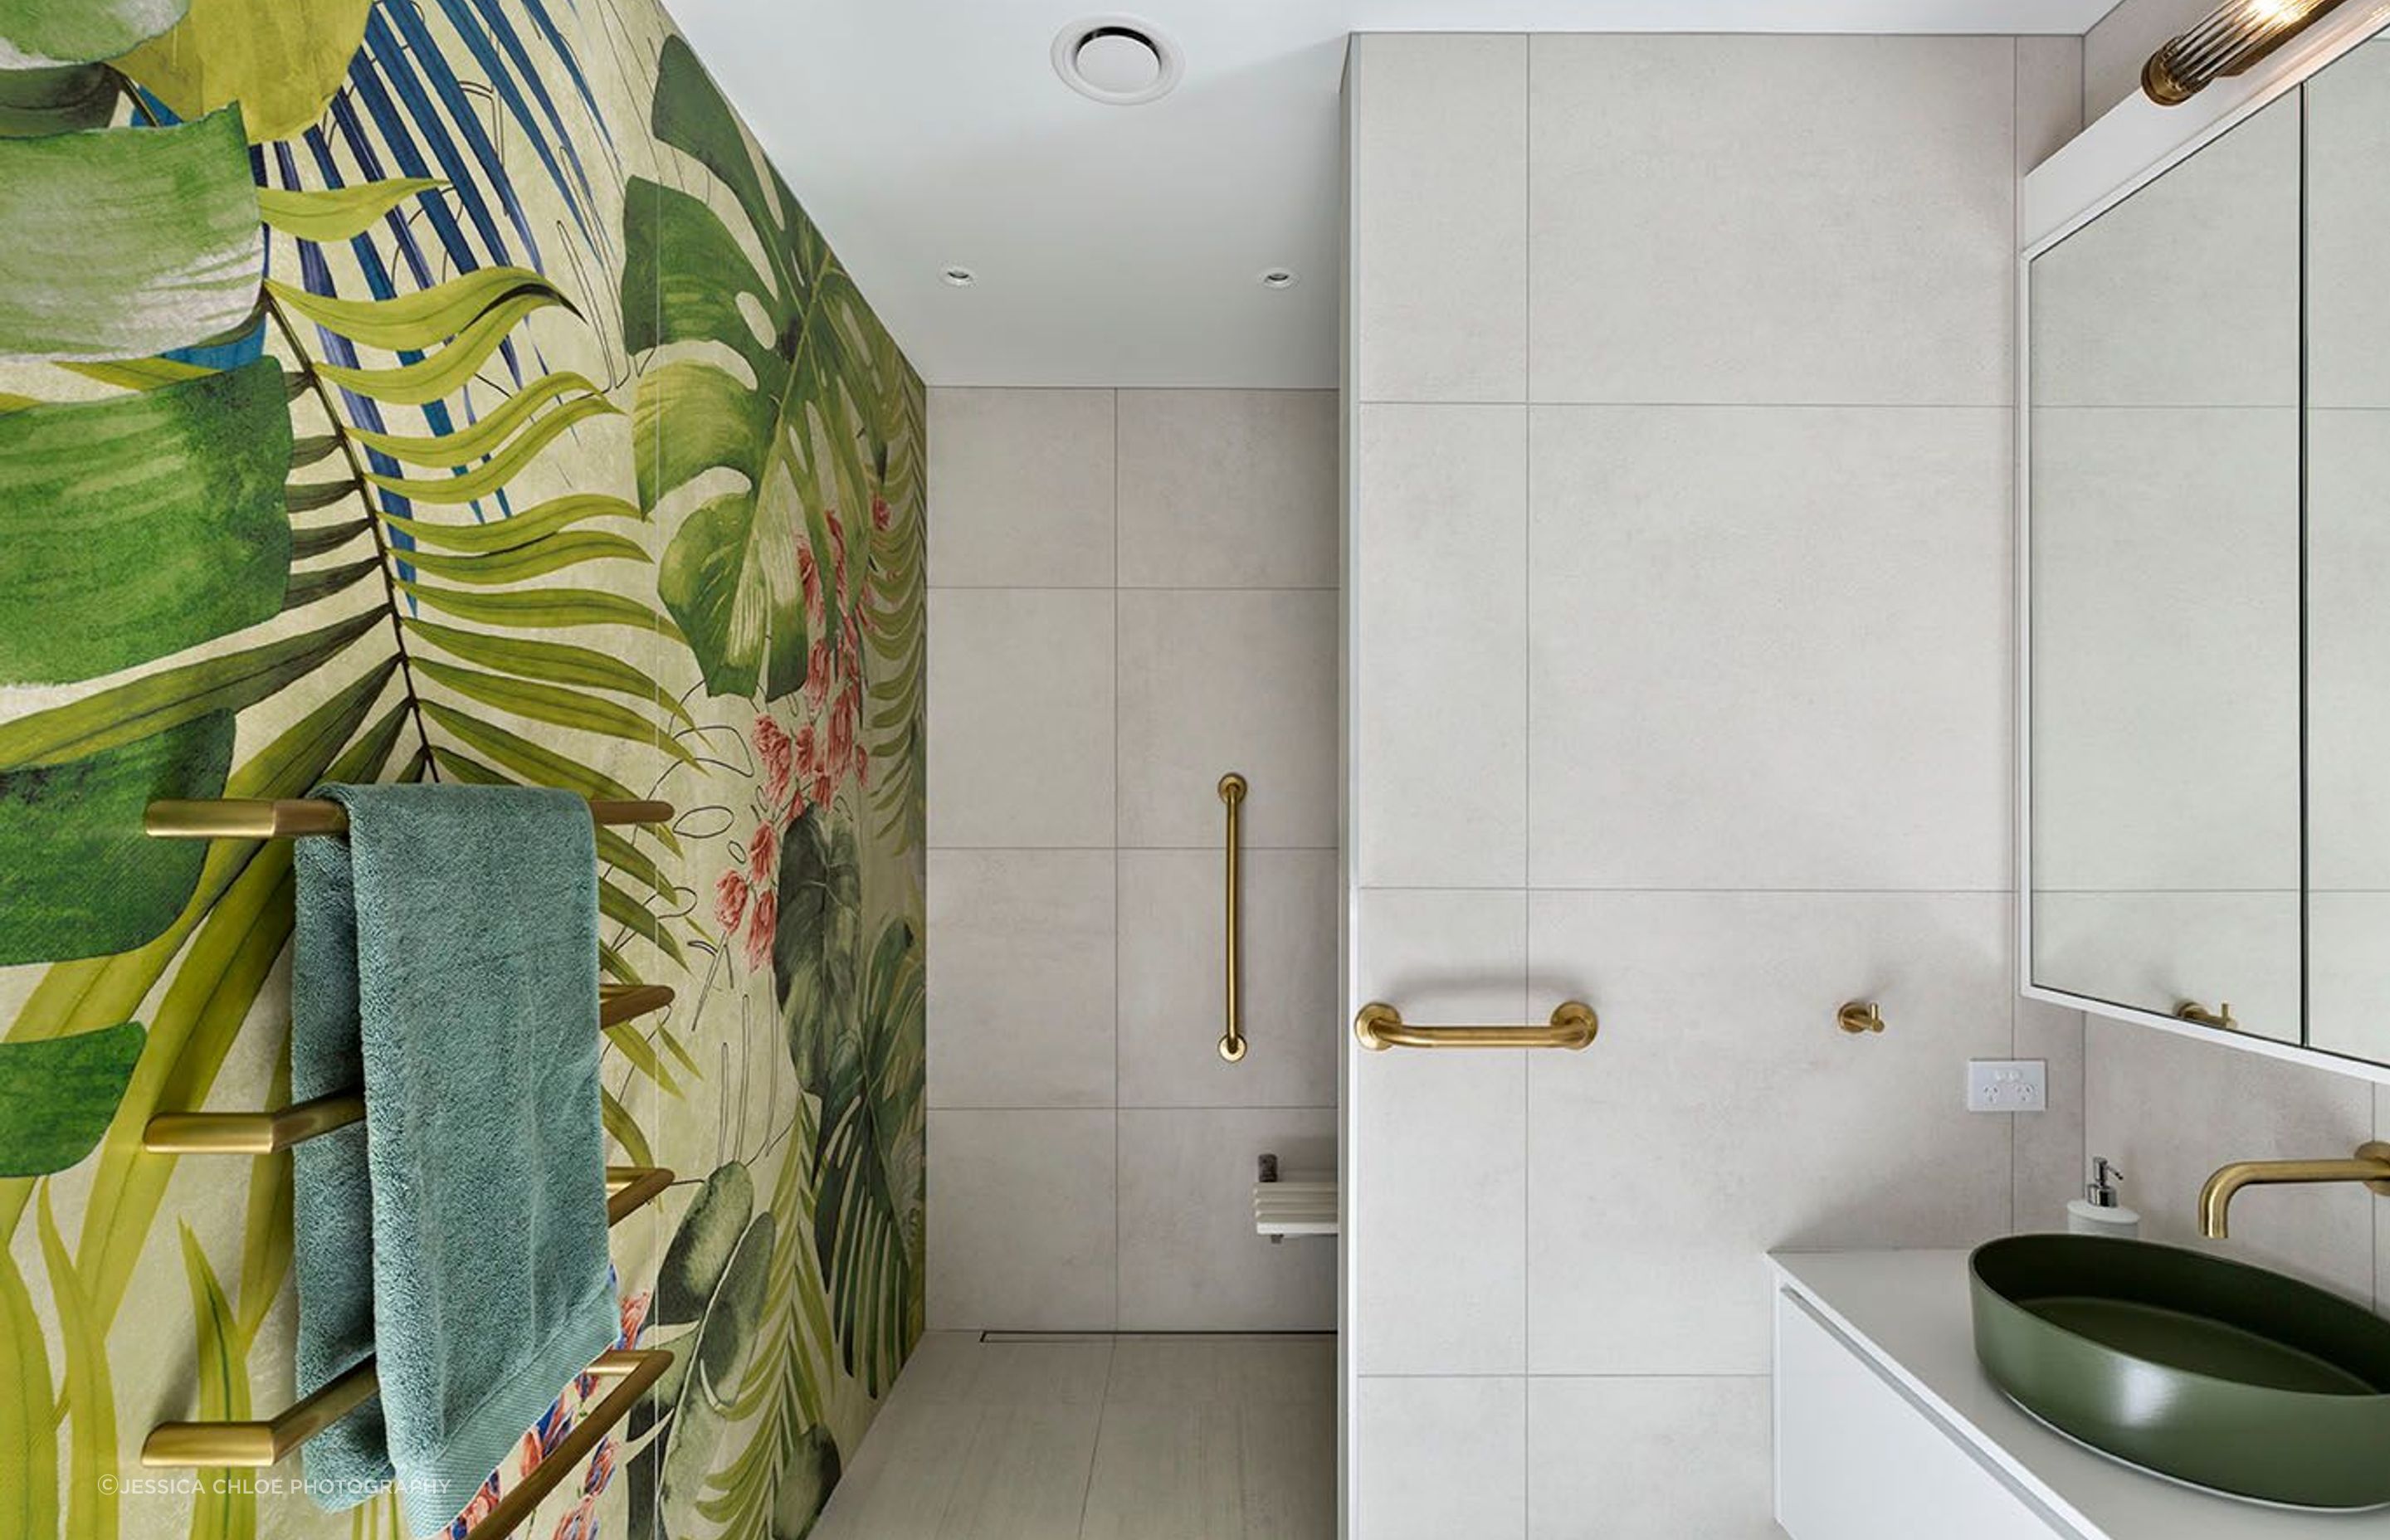 Feature tiles add vibrance to the bathroom.